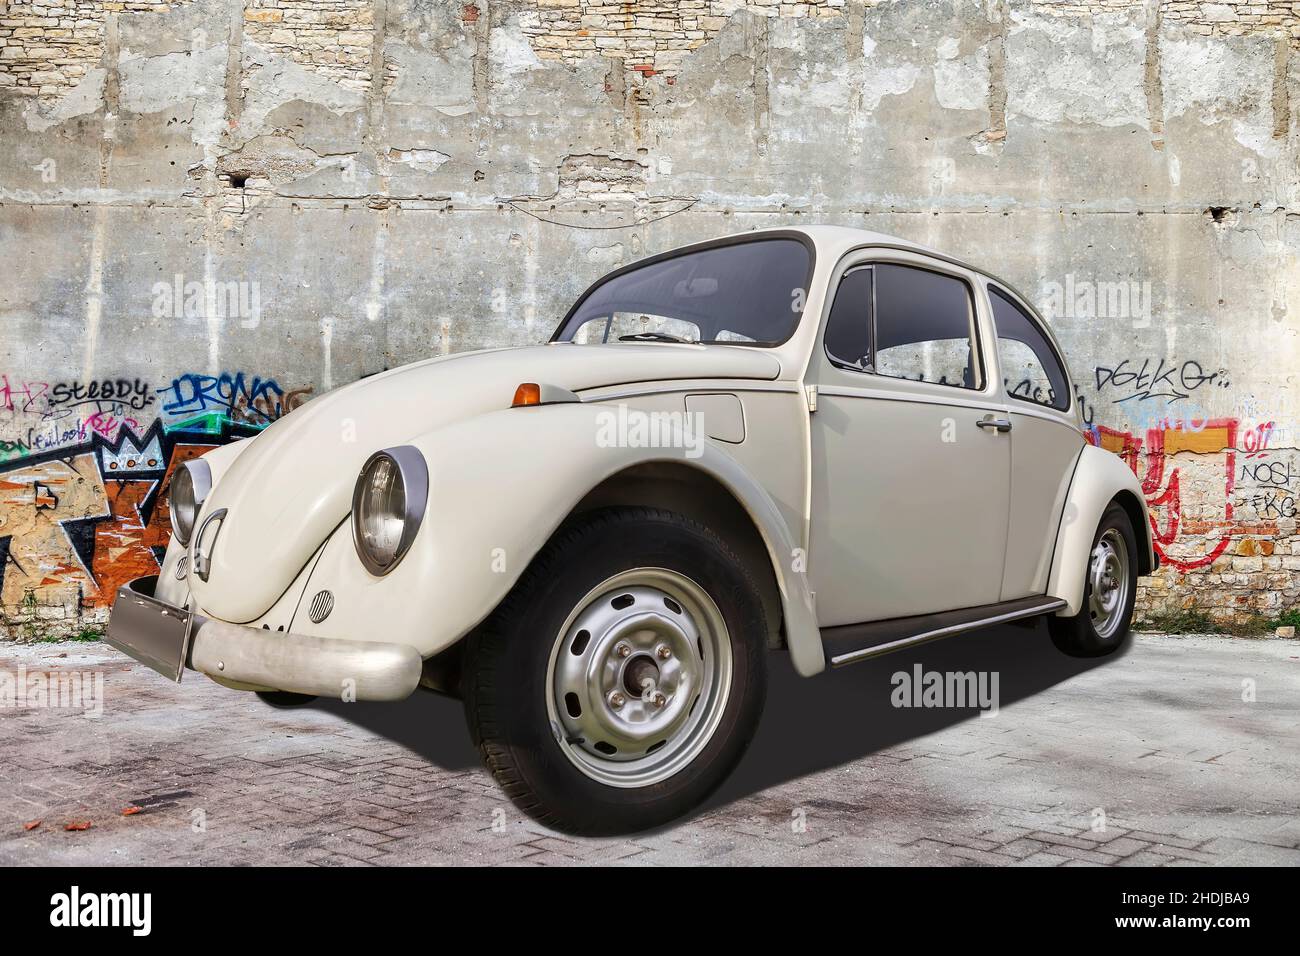 PULA, CROATIA - DECEMBER 12, 2016: VW beetle old-timer car parked in front of the wall with colorful graffiti, Pula, Istria, Croatia Stock Photo